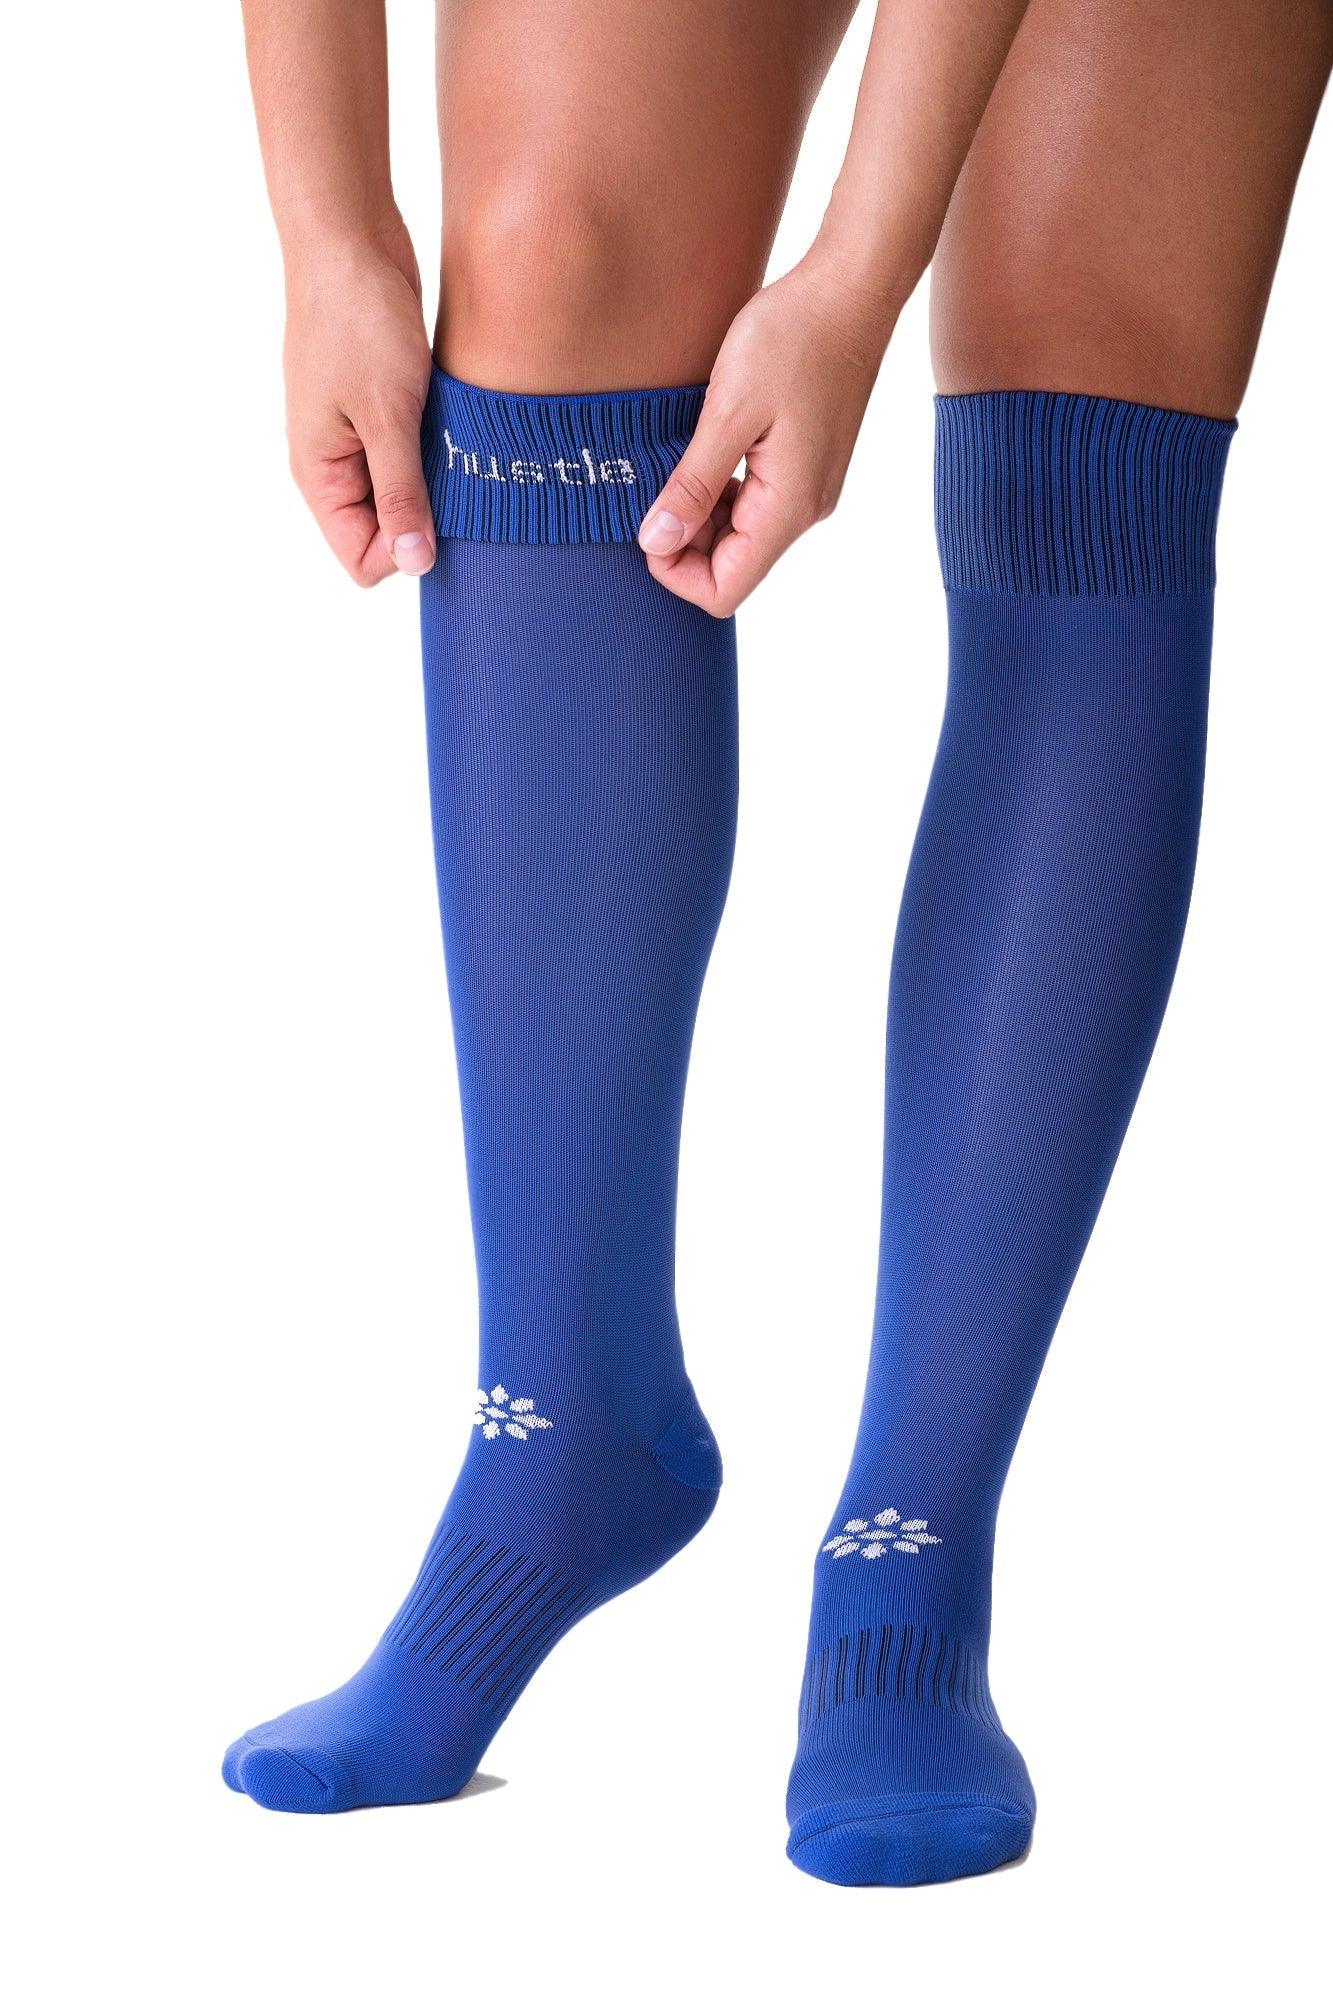 Classic Softball Over The Knee Socks - Closeout - RIP-IT Sports